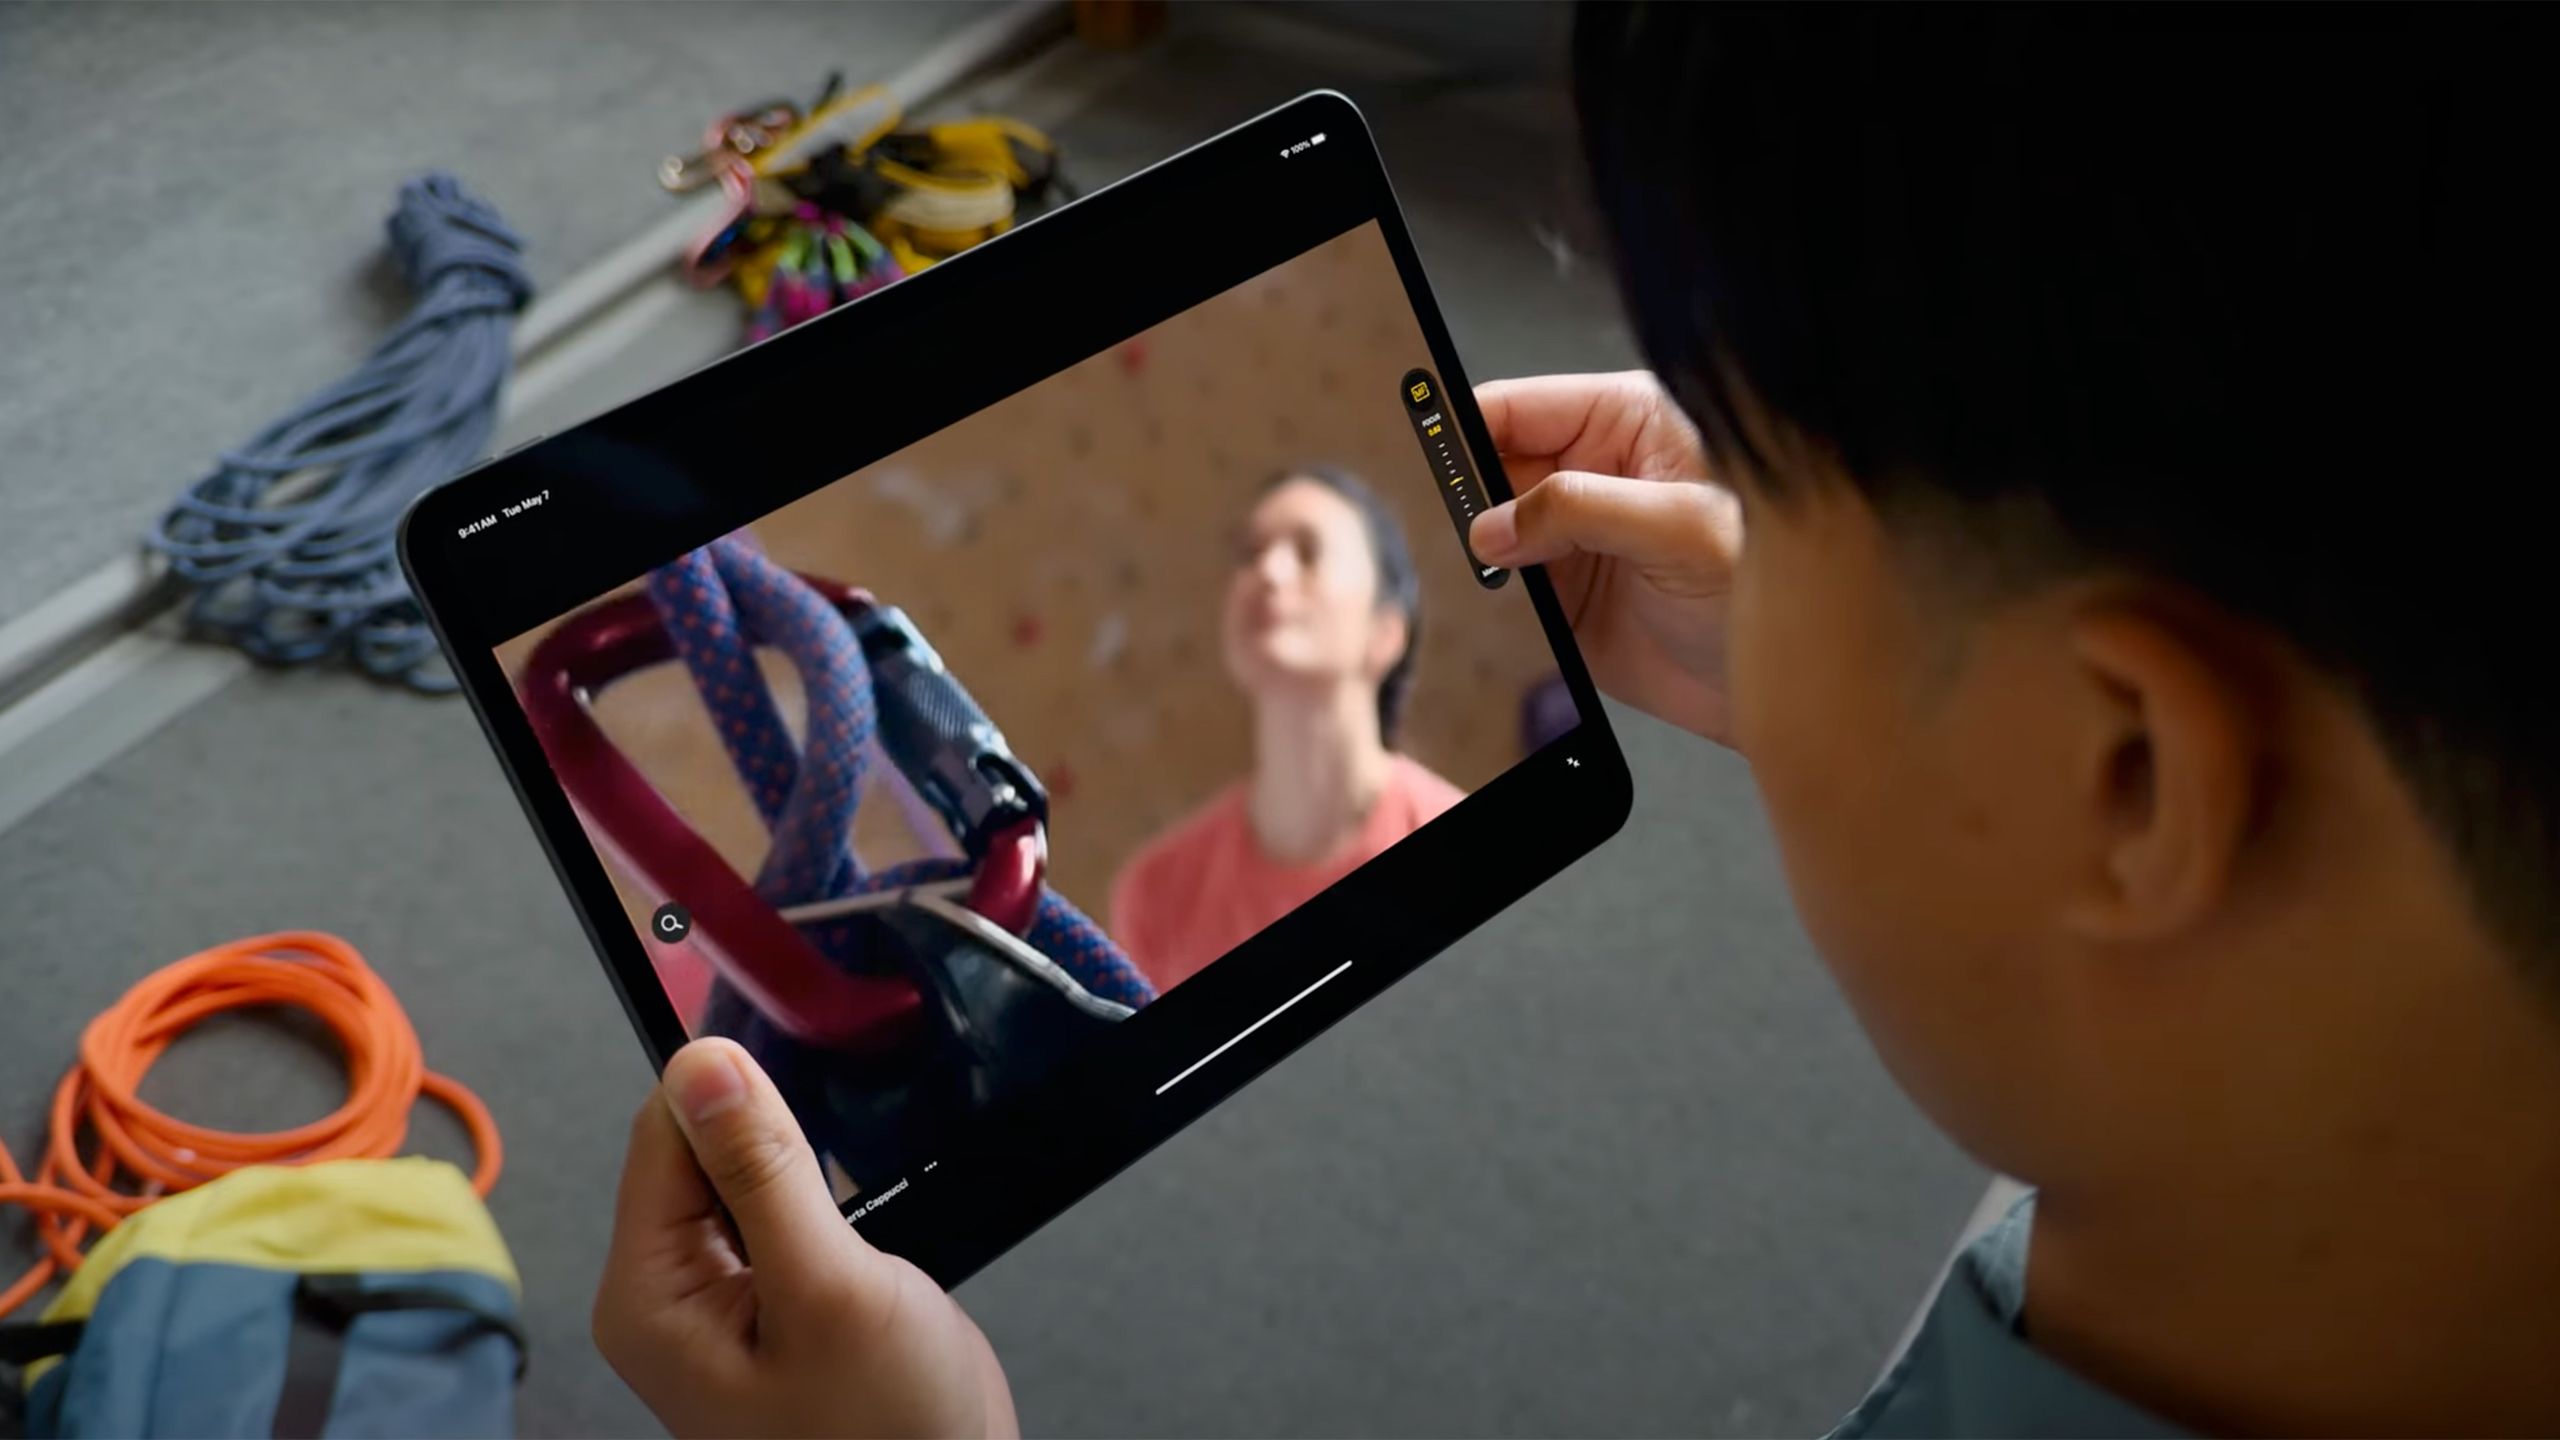 Apples new iPad Pros are only as good as the software they enable